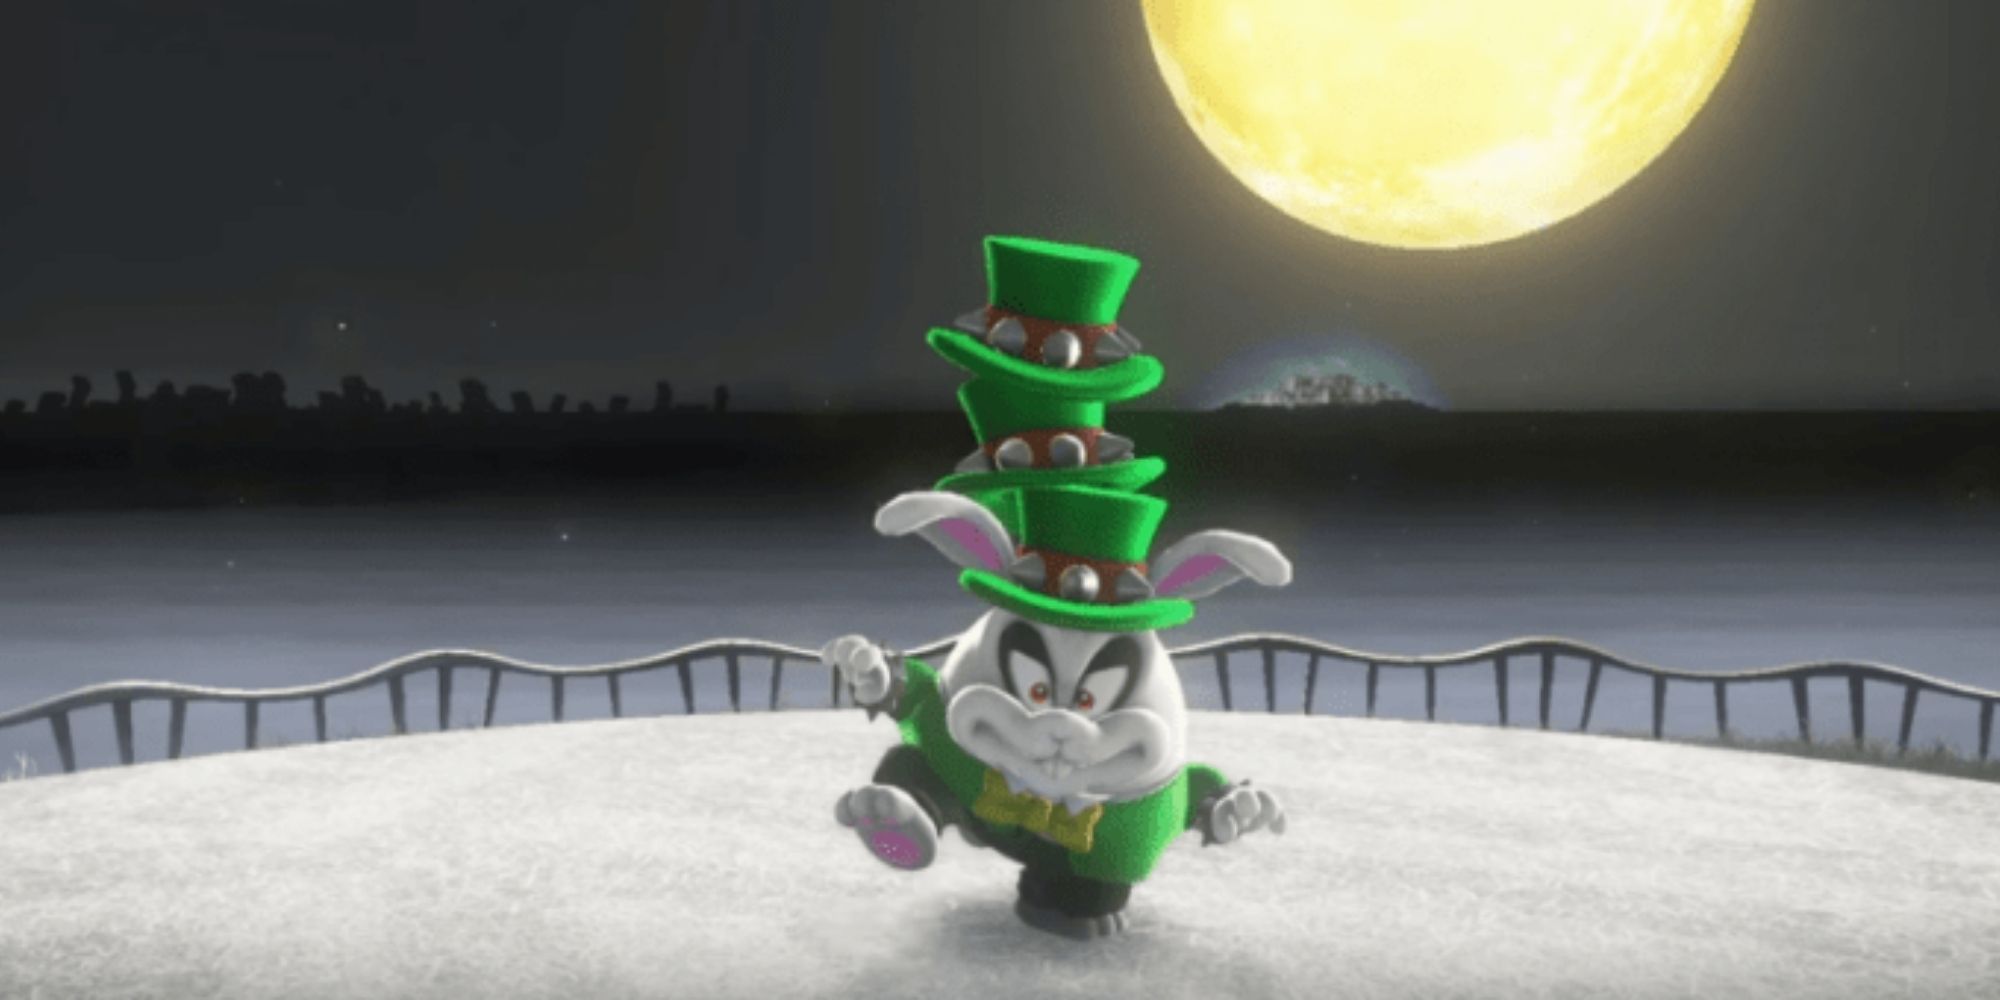 Topper wearing multiple green hats during his battle in Super Mario Odyssey